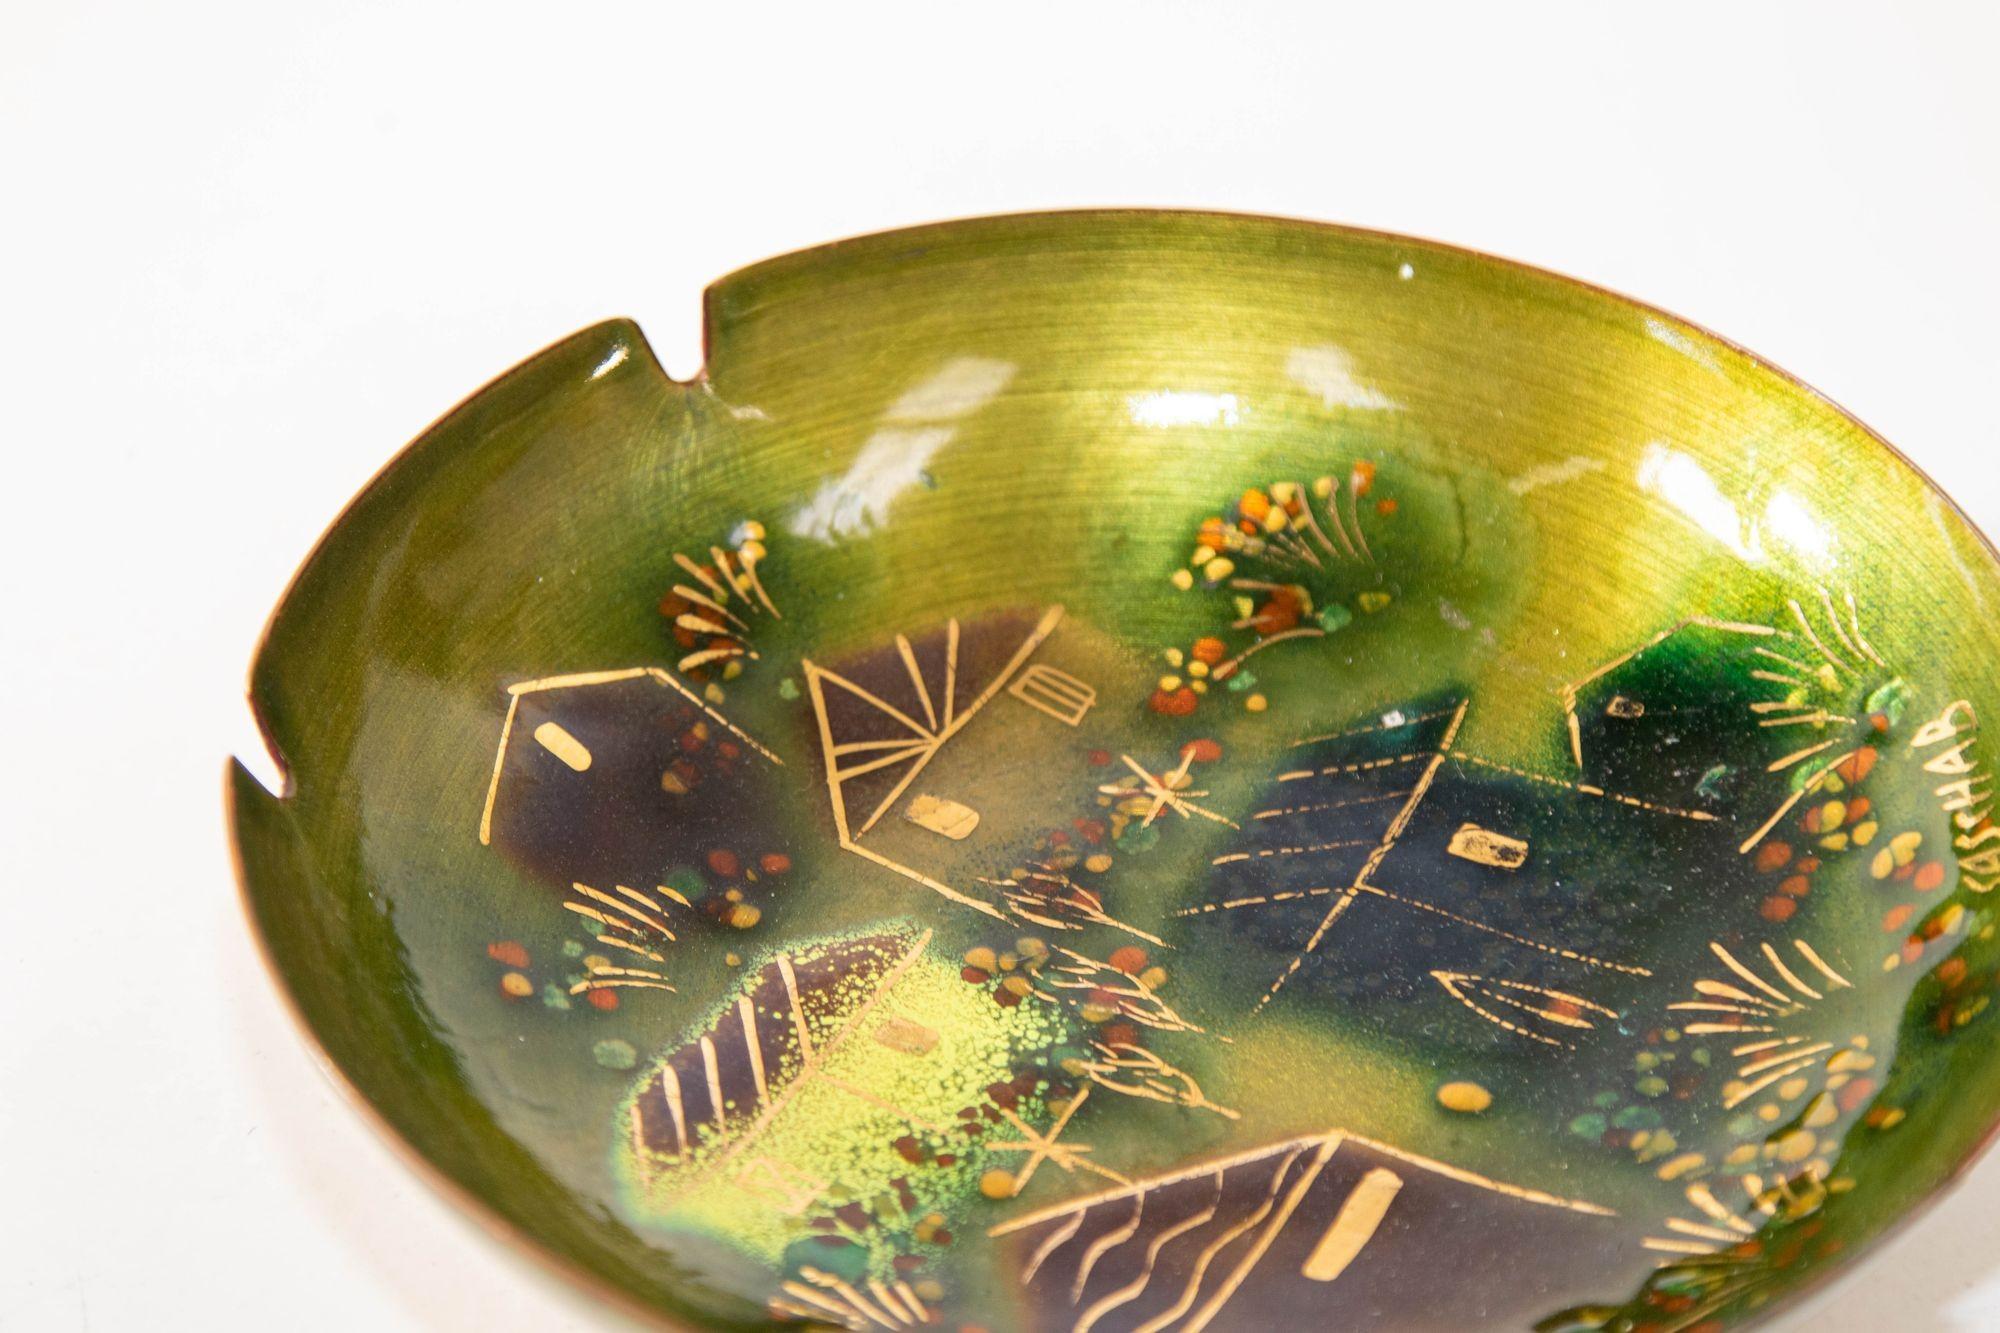 Hand-Crafted Sascha Brastoff Midcentury Signed Green Enamel Ashtray, Candy Dish, 1950s For Sale